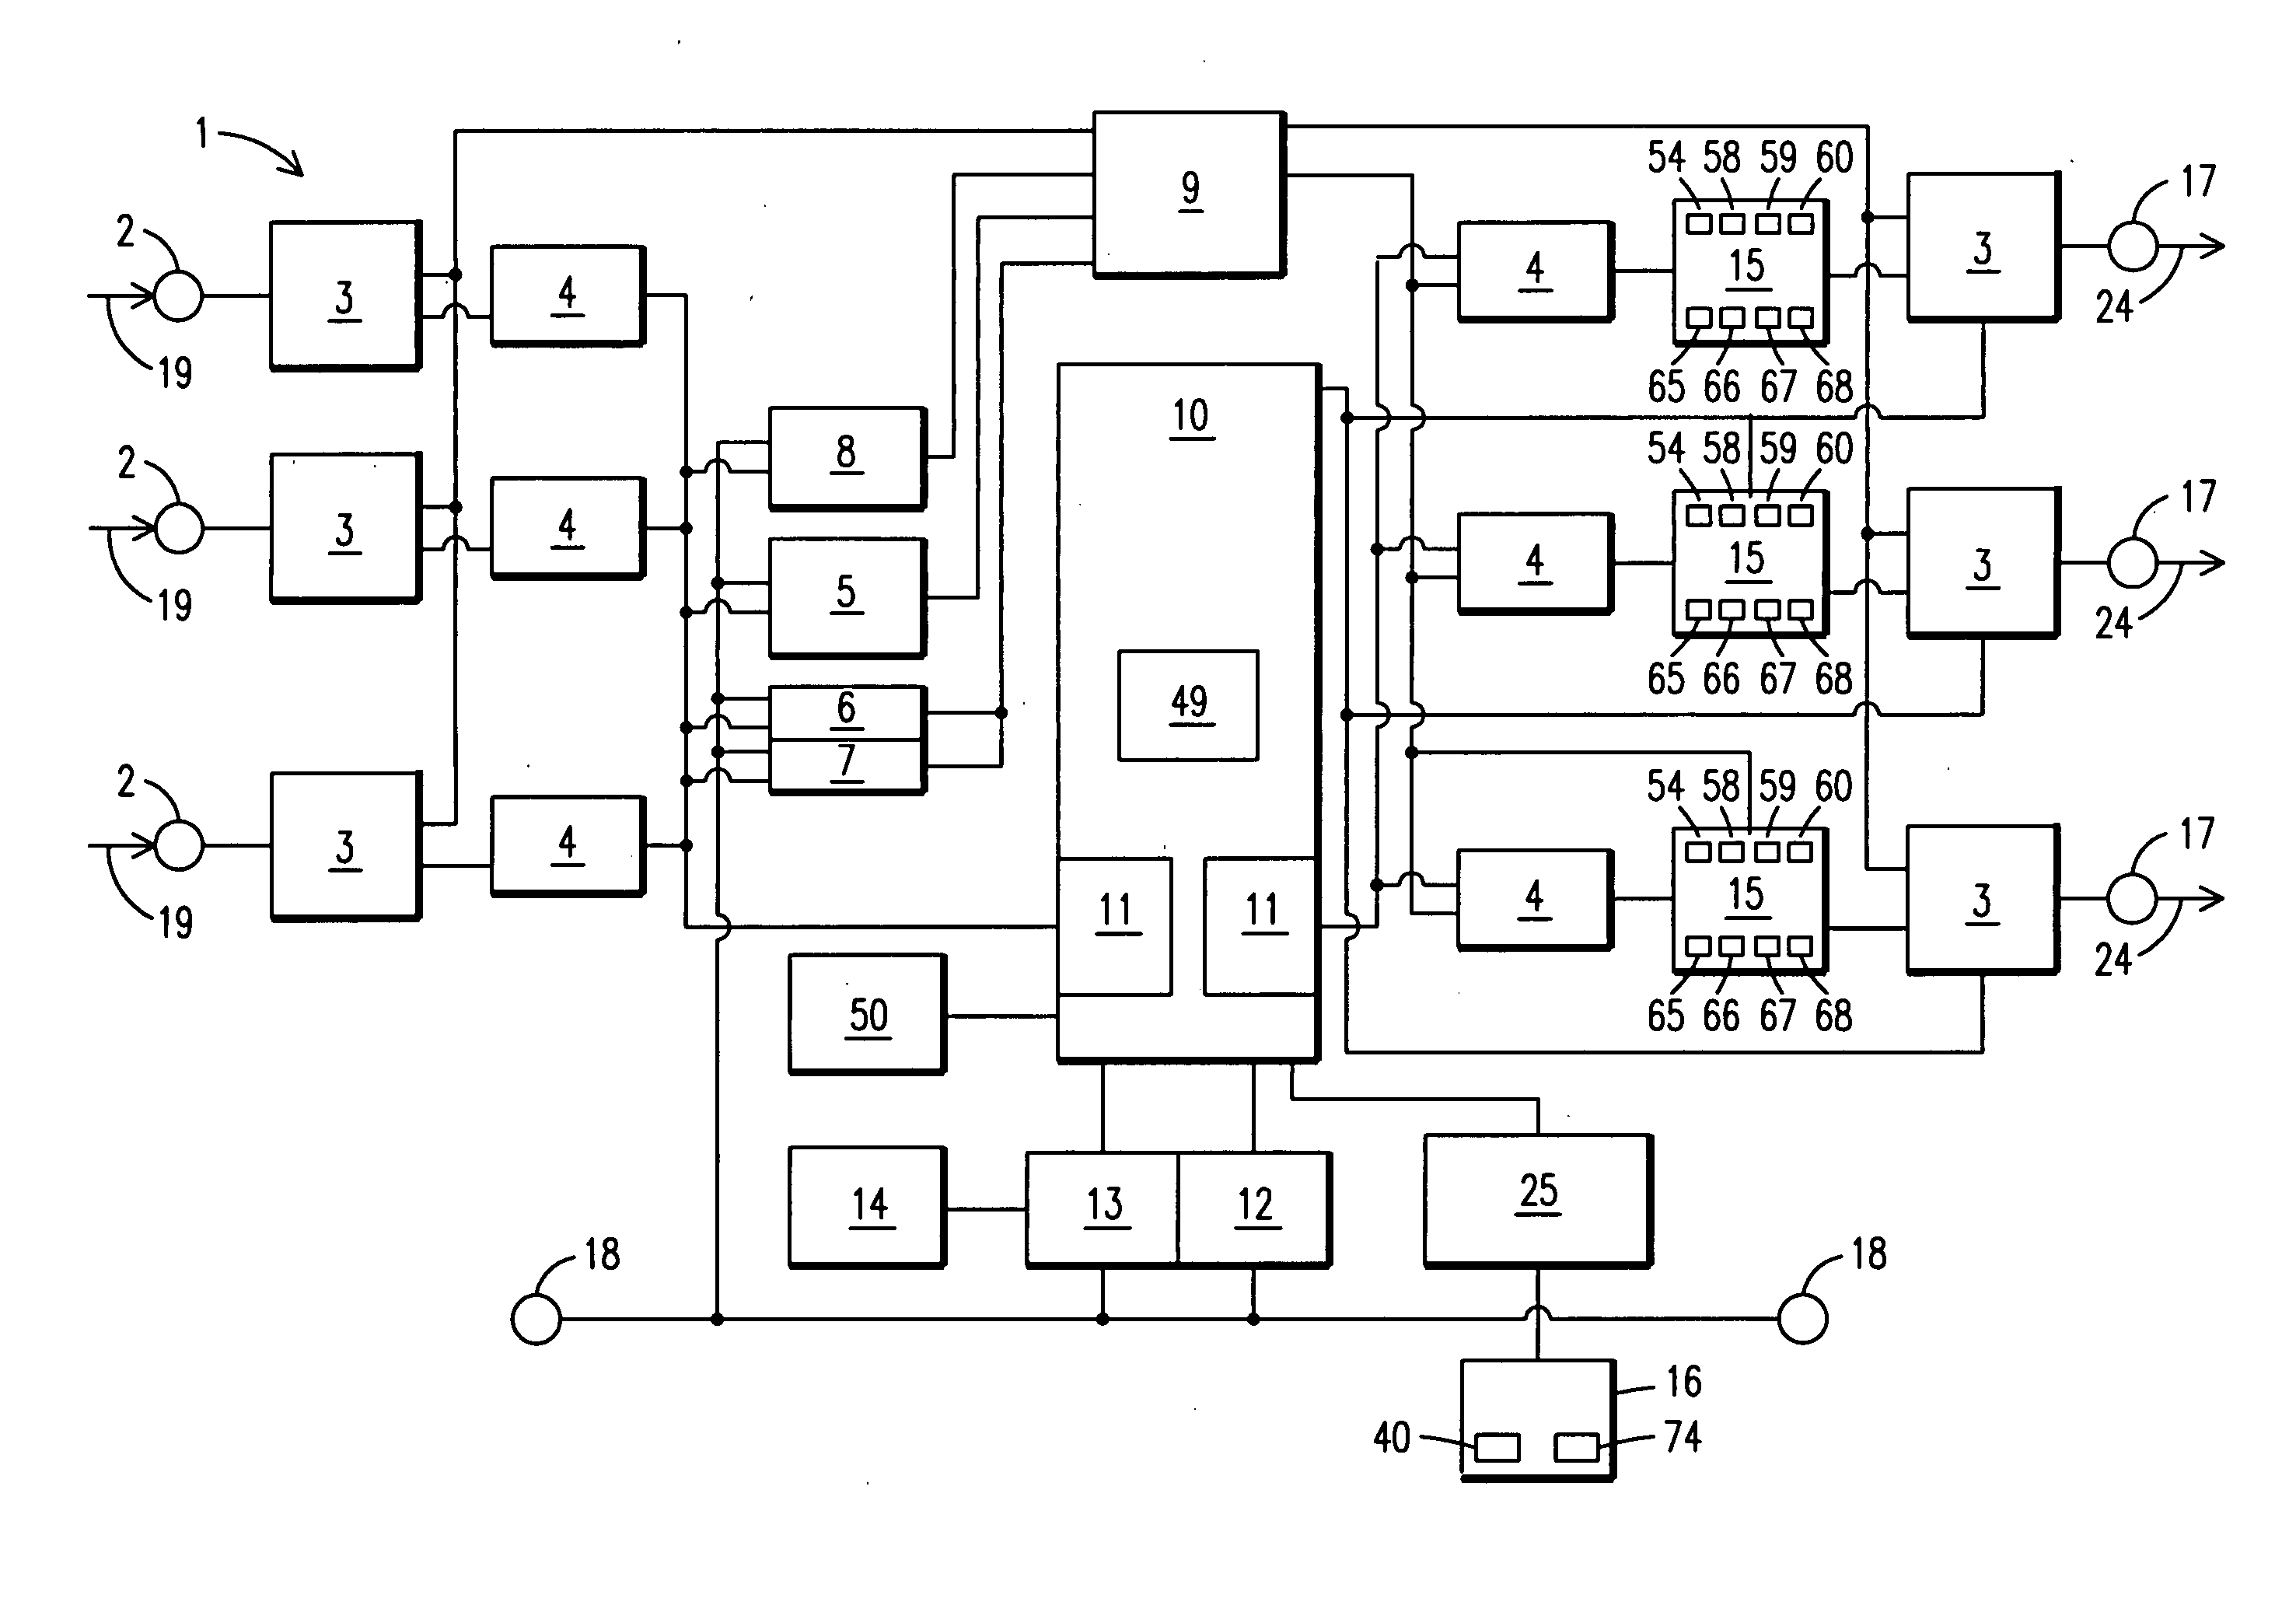 Igbt/fet-based energy savings device, system and method